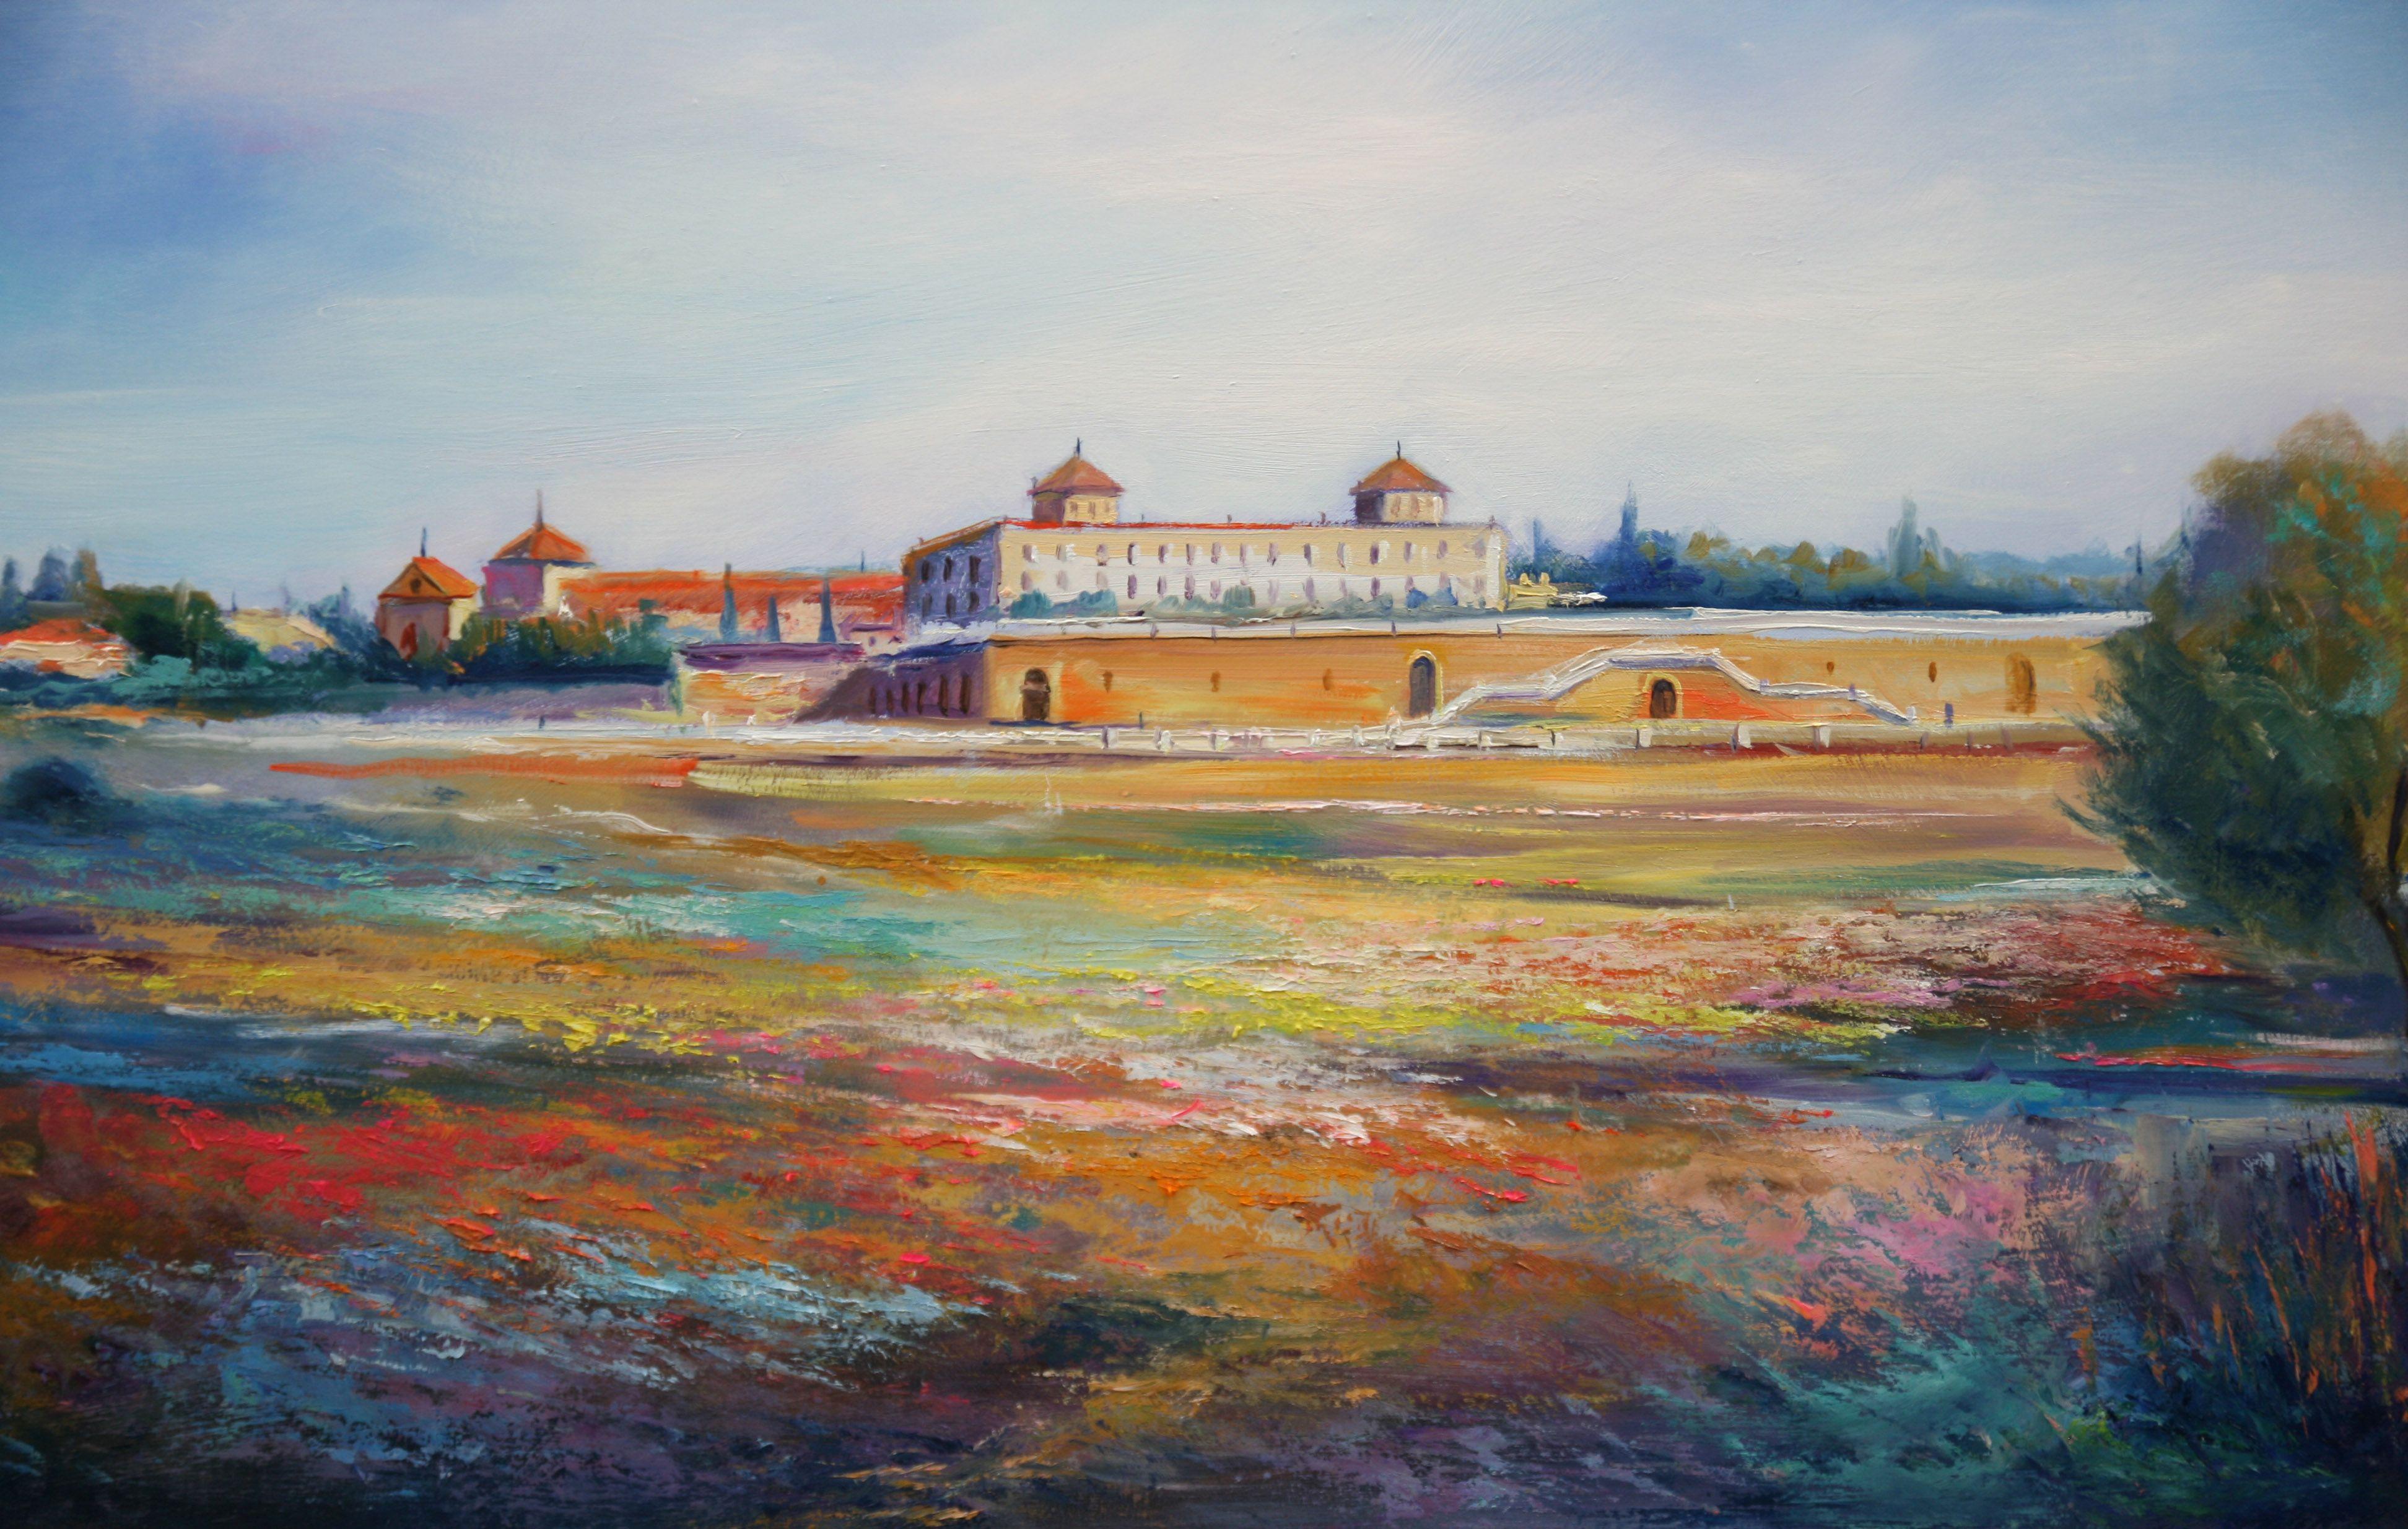 Clouds Over The Boadilla Palace, Painting, Oil on Wood Panel 4